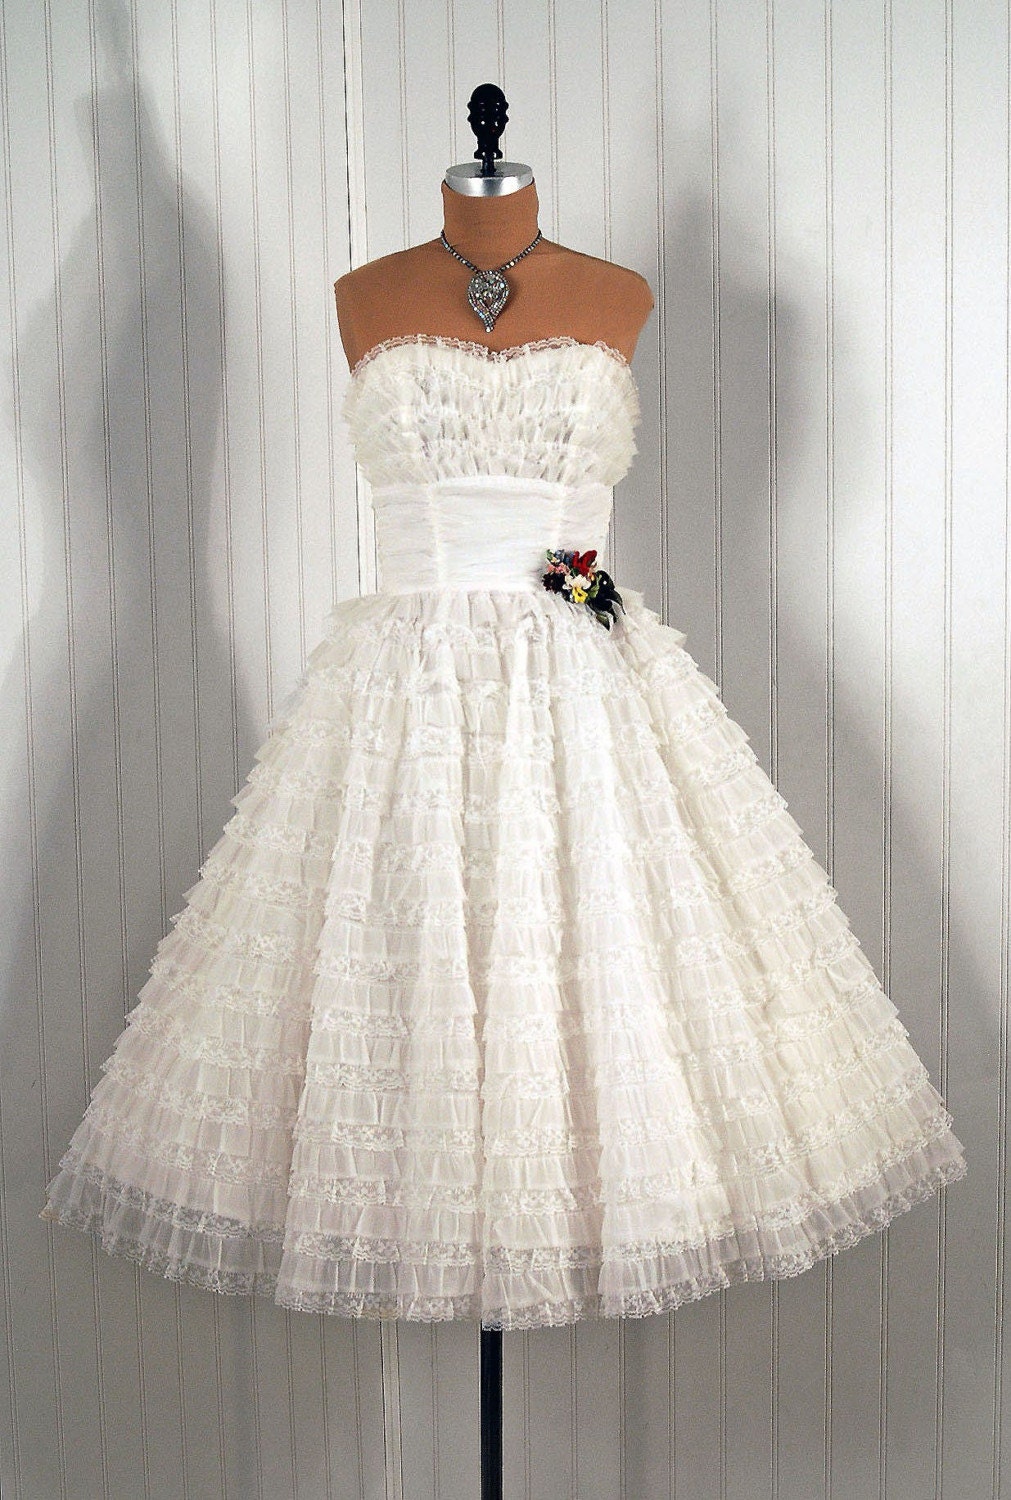 1950's Vintage Strapless White-Ruffle Tiered Chiffon and Lace Applique Couture Princess Party Wedding Dress